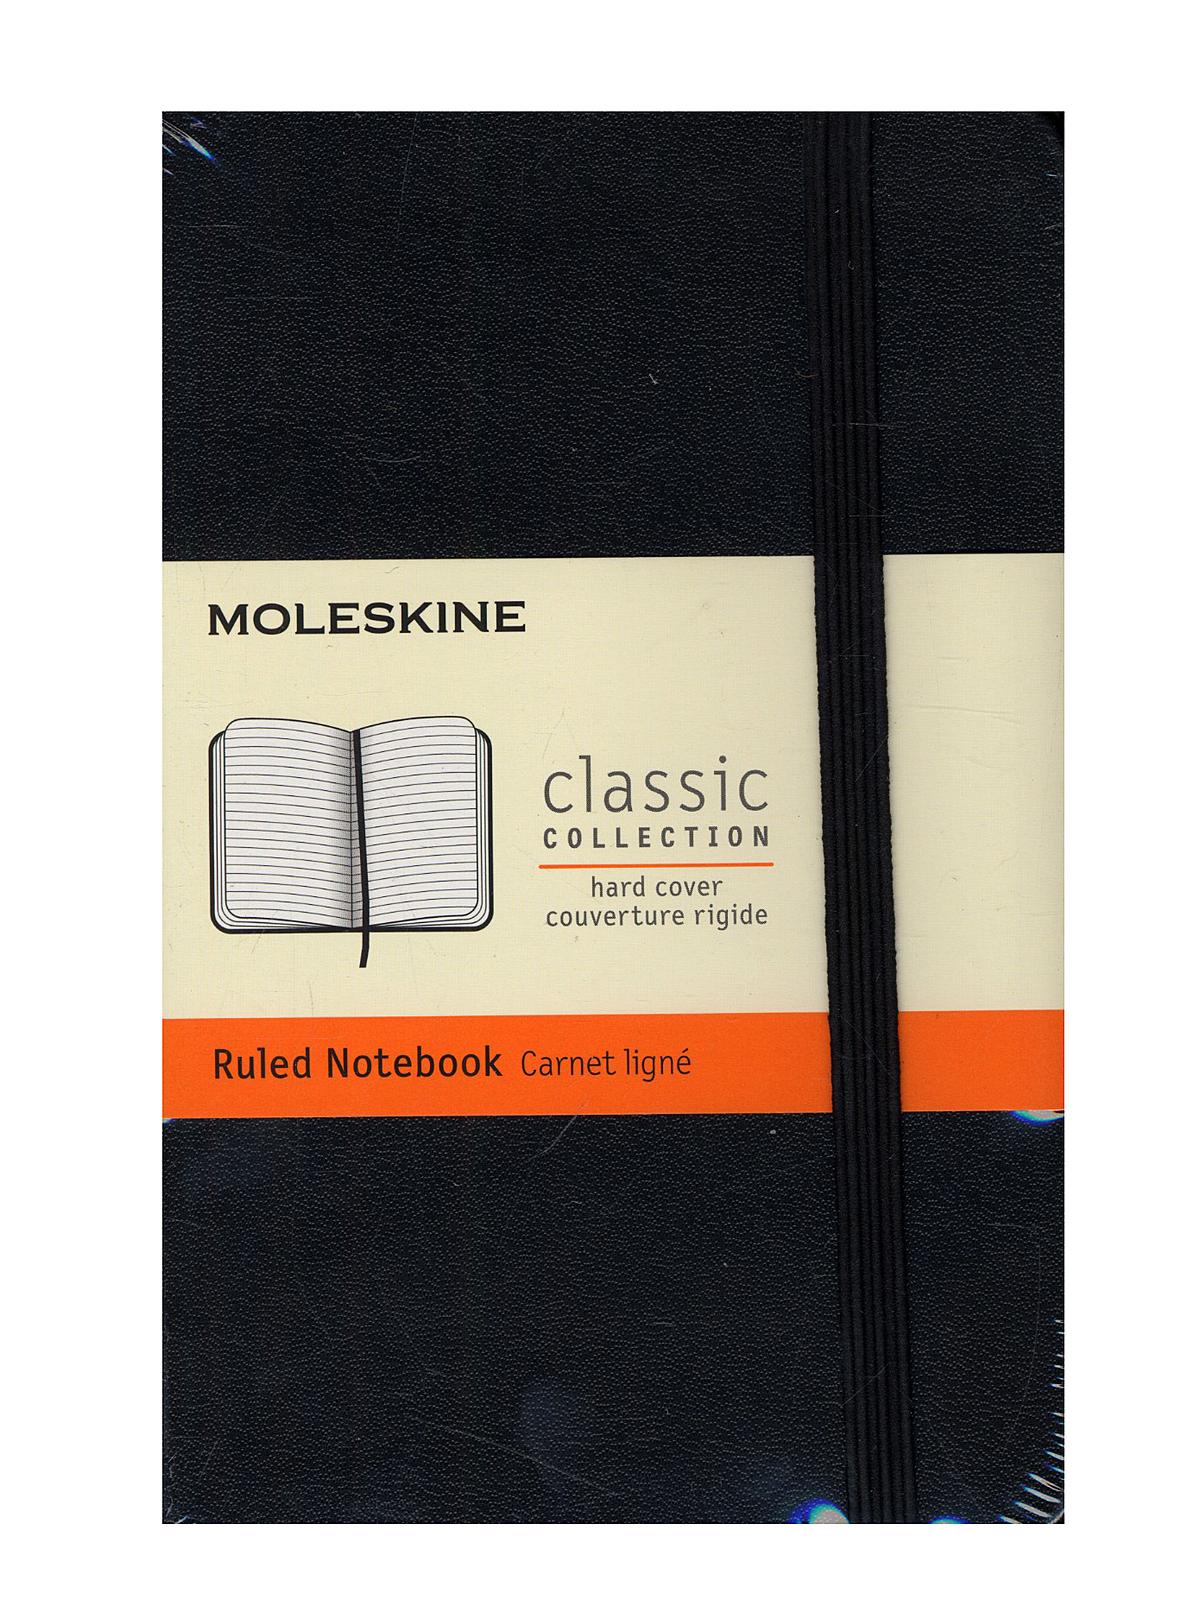 Classic Hard Cover Notebooks Black 3 1 2 In. X 5 1 2 In. 192 Pages, Lined